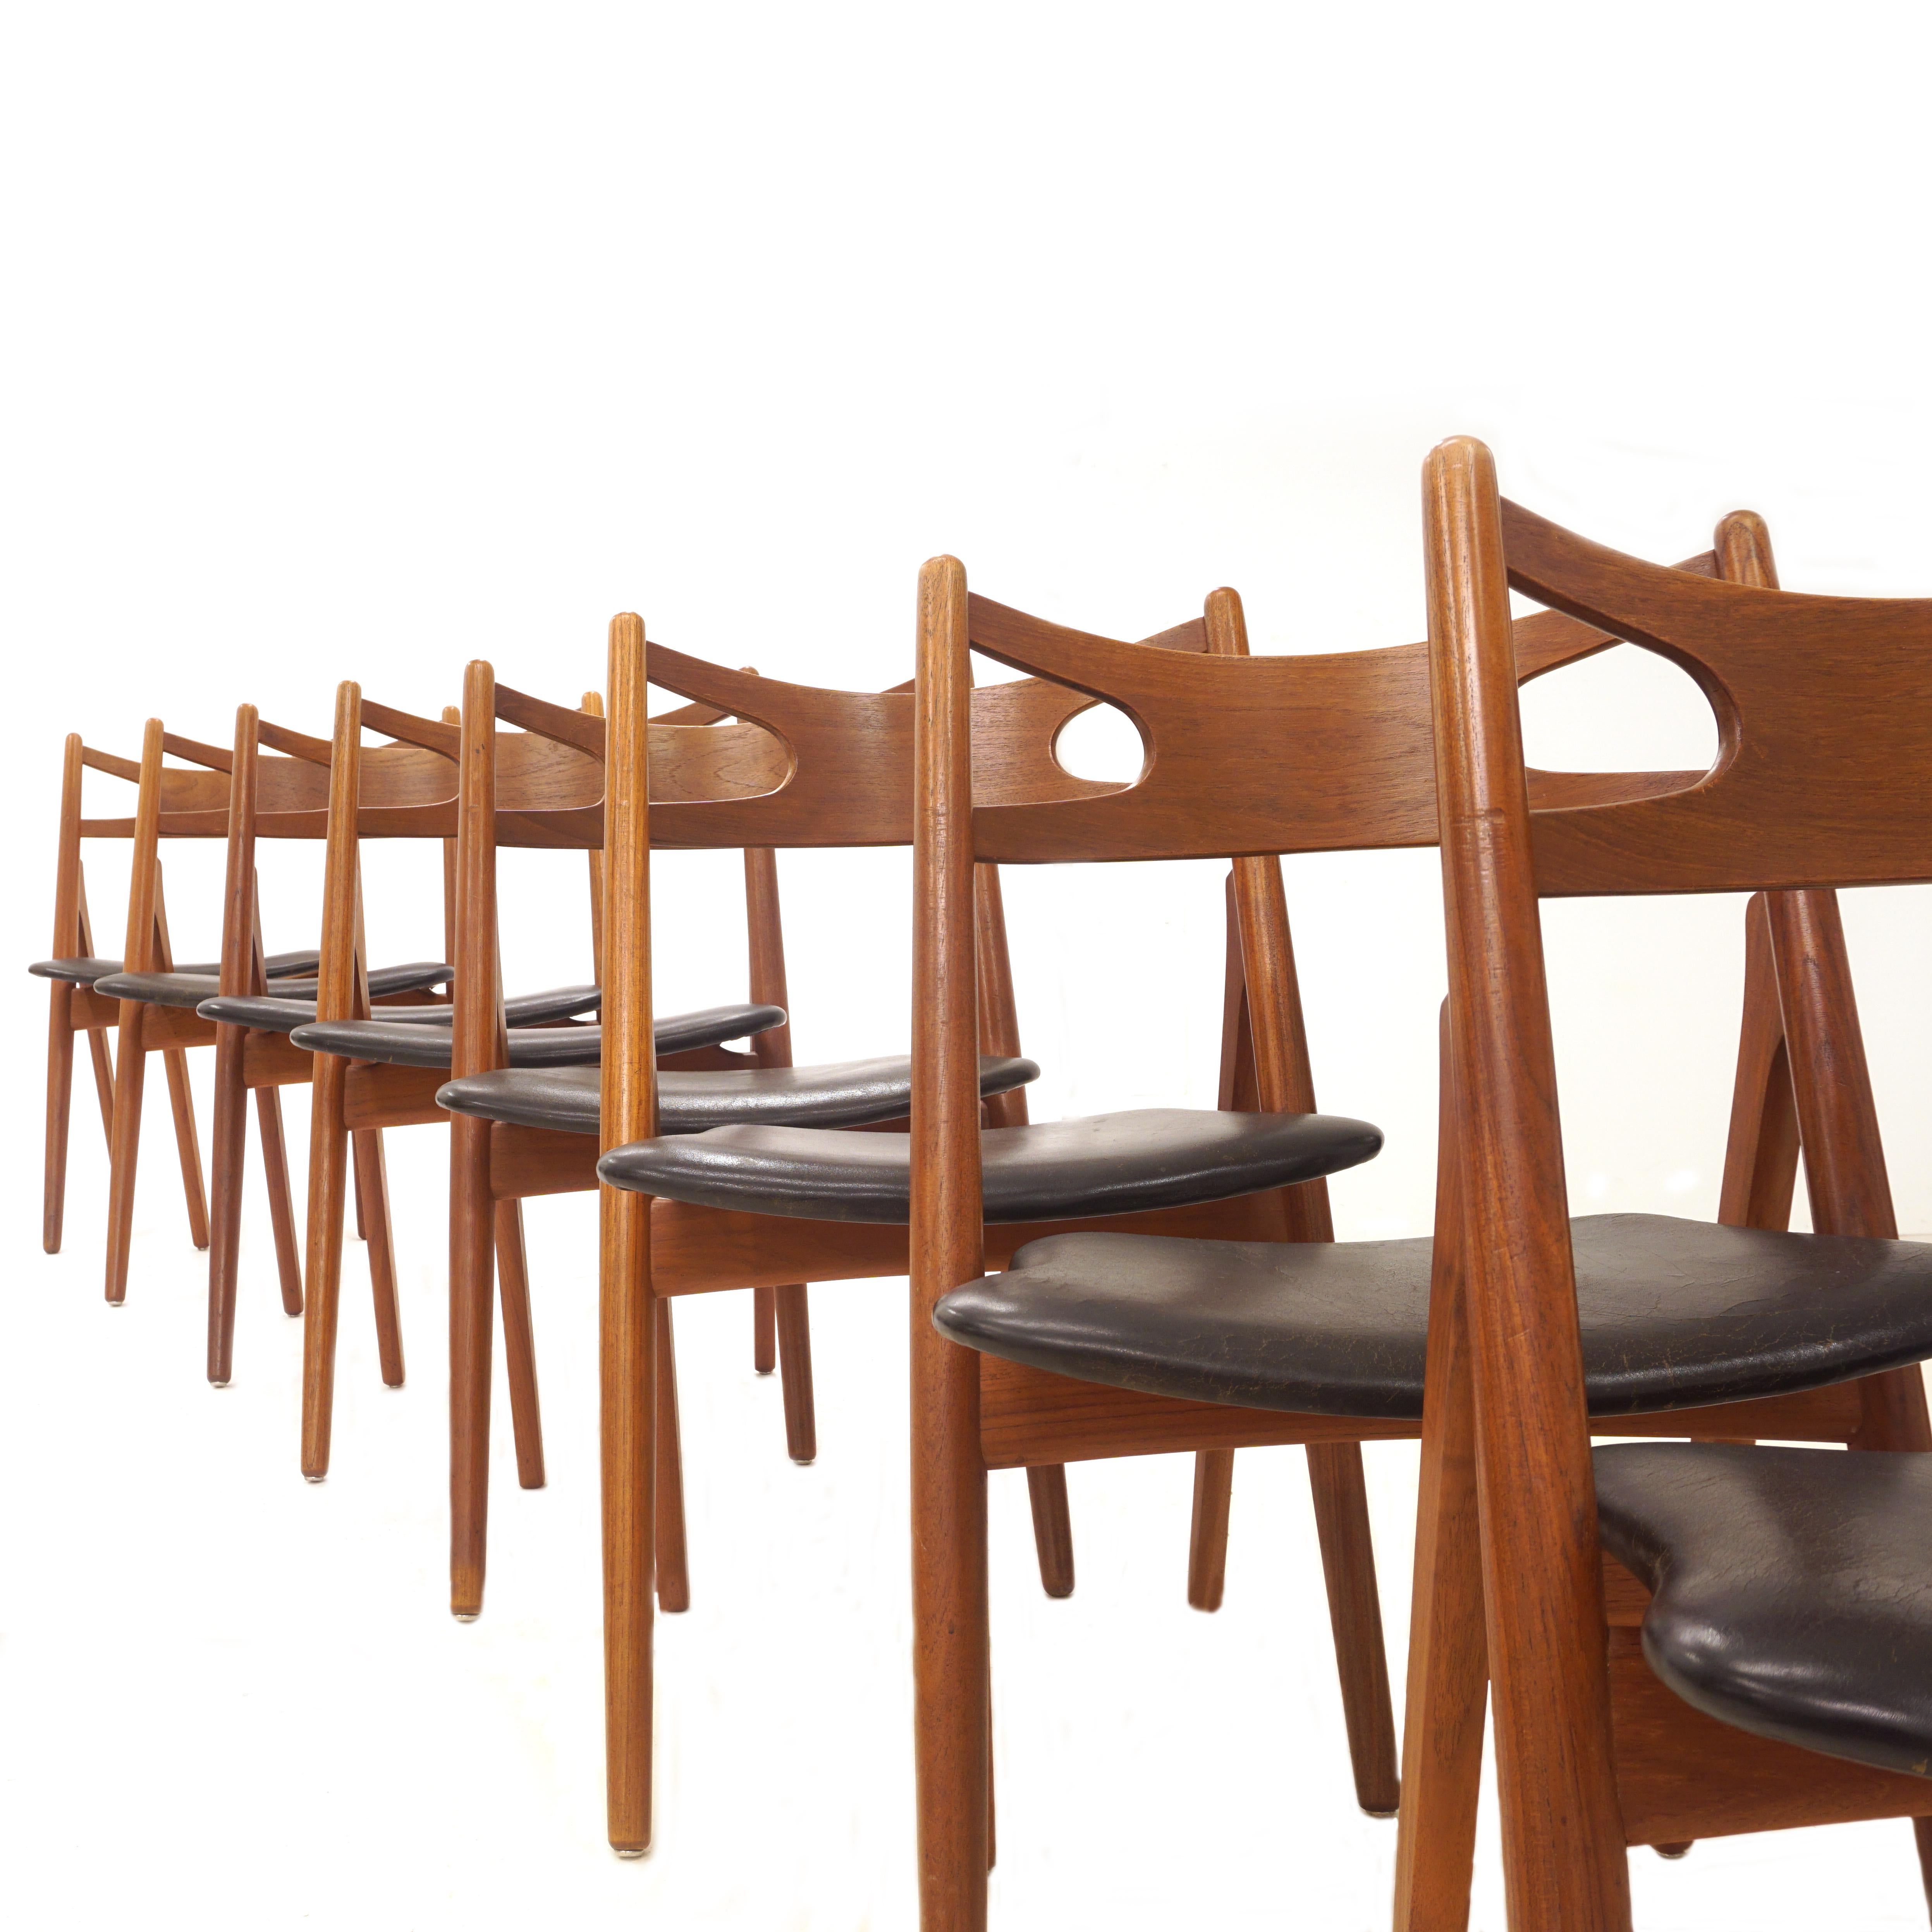 Rare set of eight chairs in an original condition.